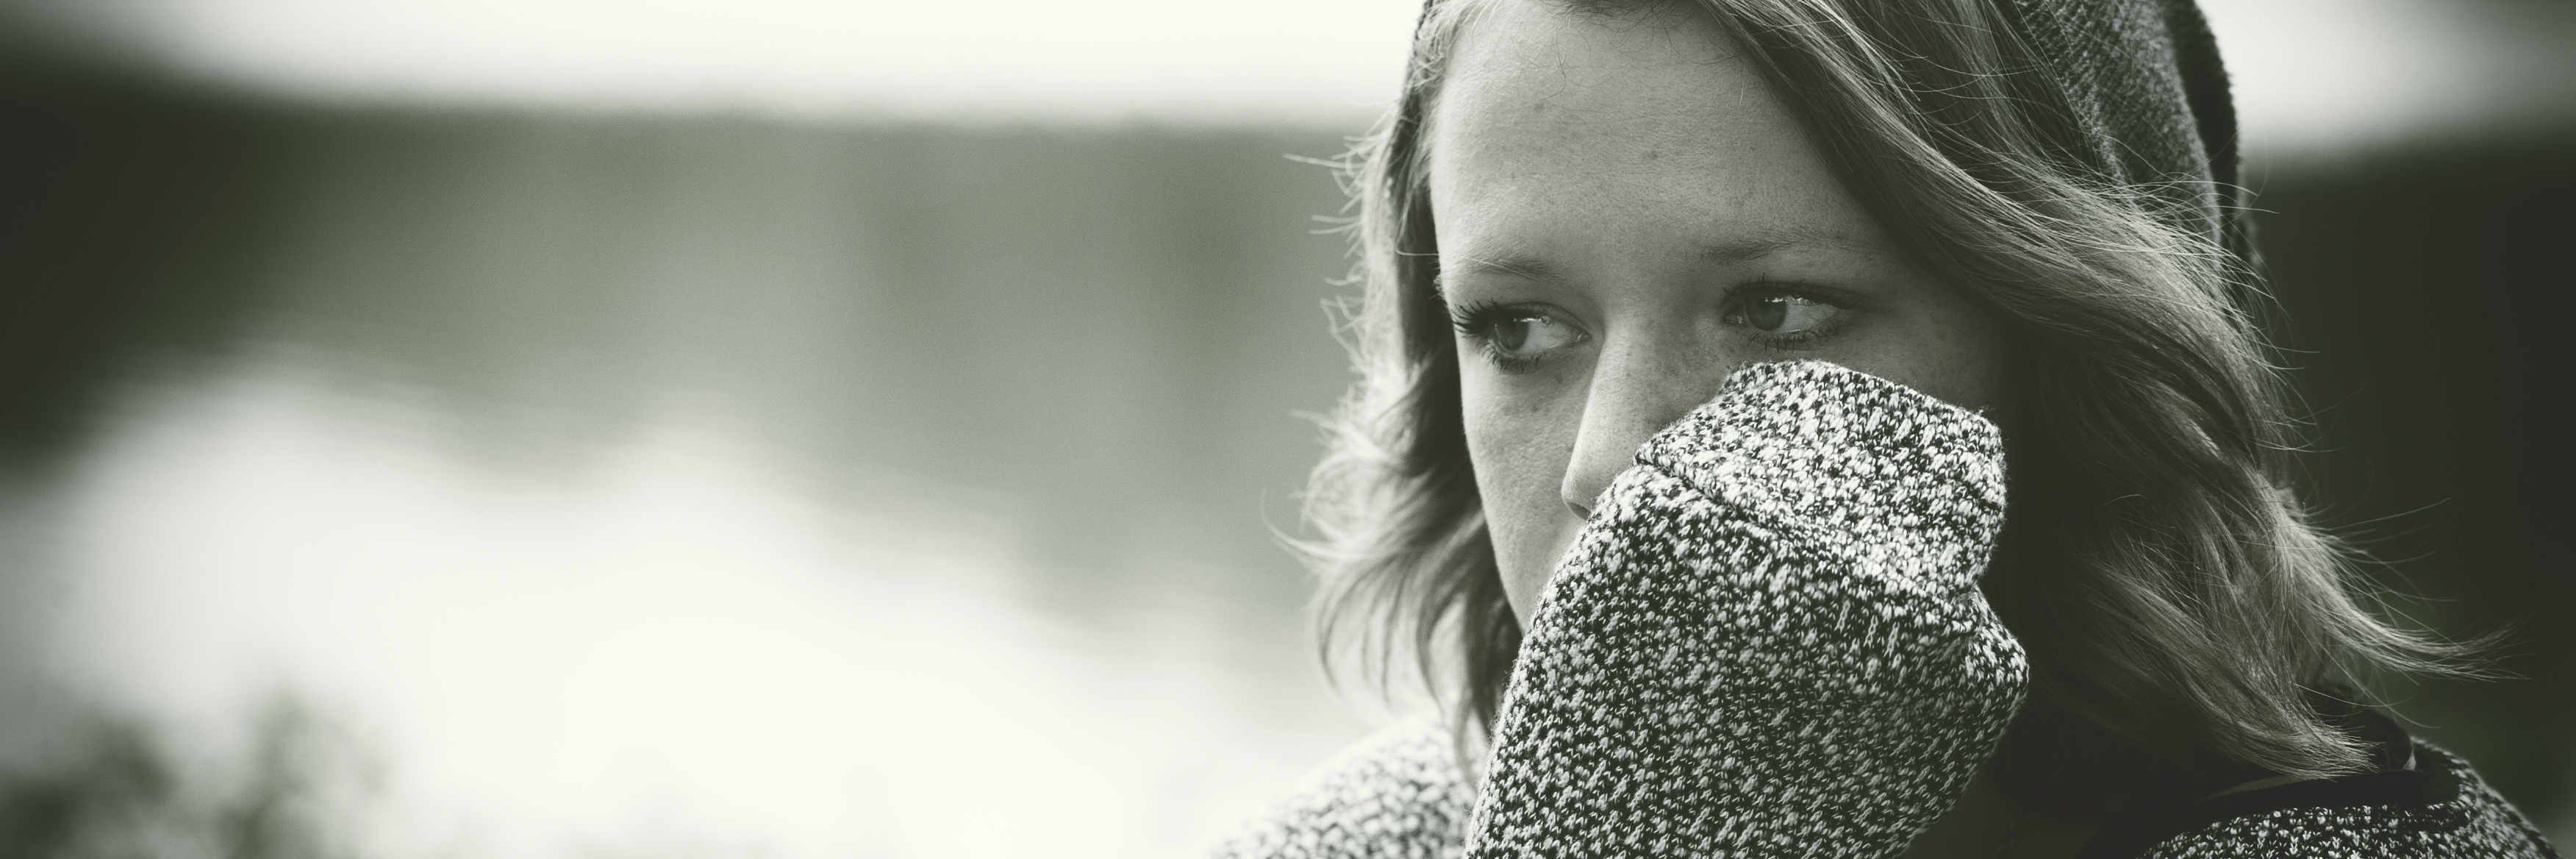 woman sitting outdoors wearing jumper and has arm covering part of her face looking sad